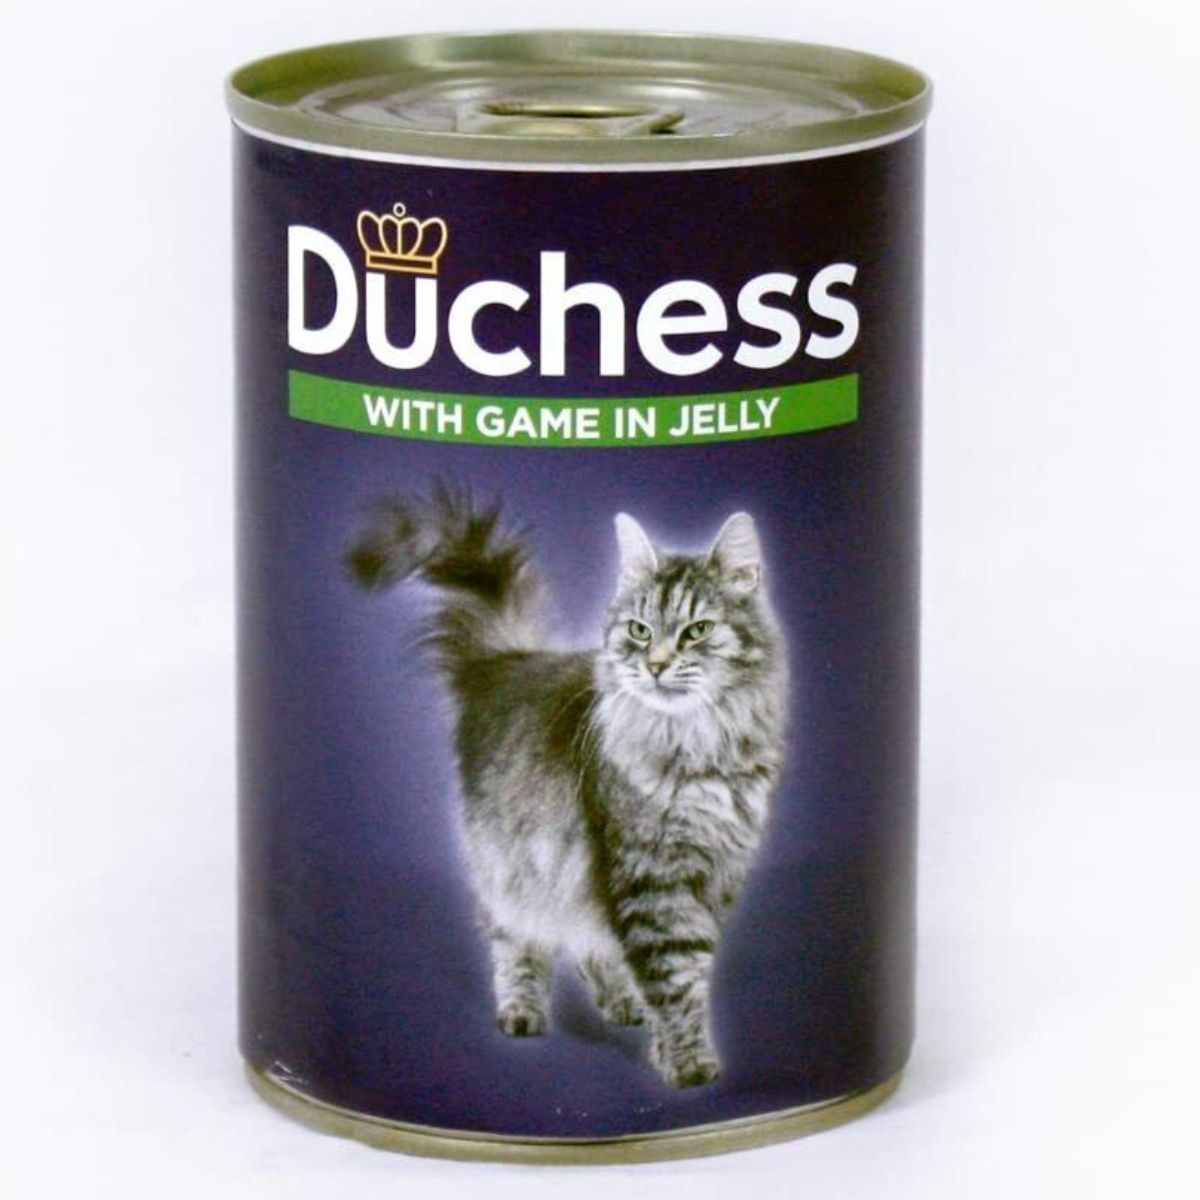 A can of Duchess - with Game in Jelly - 400g.